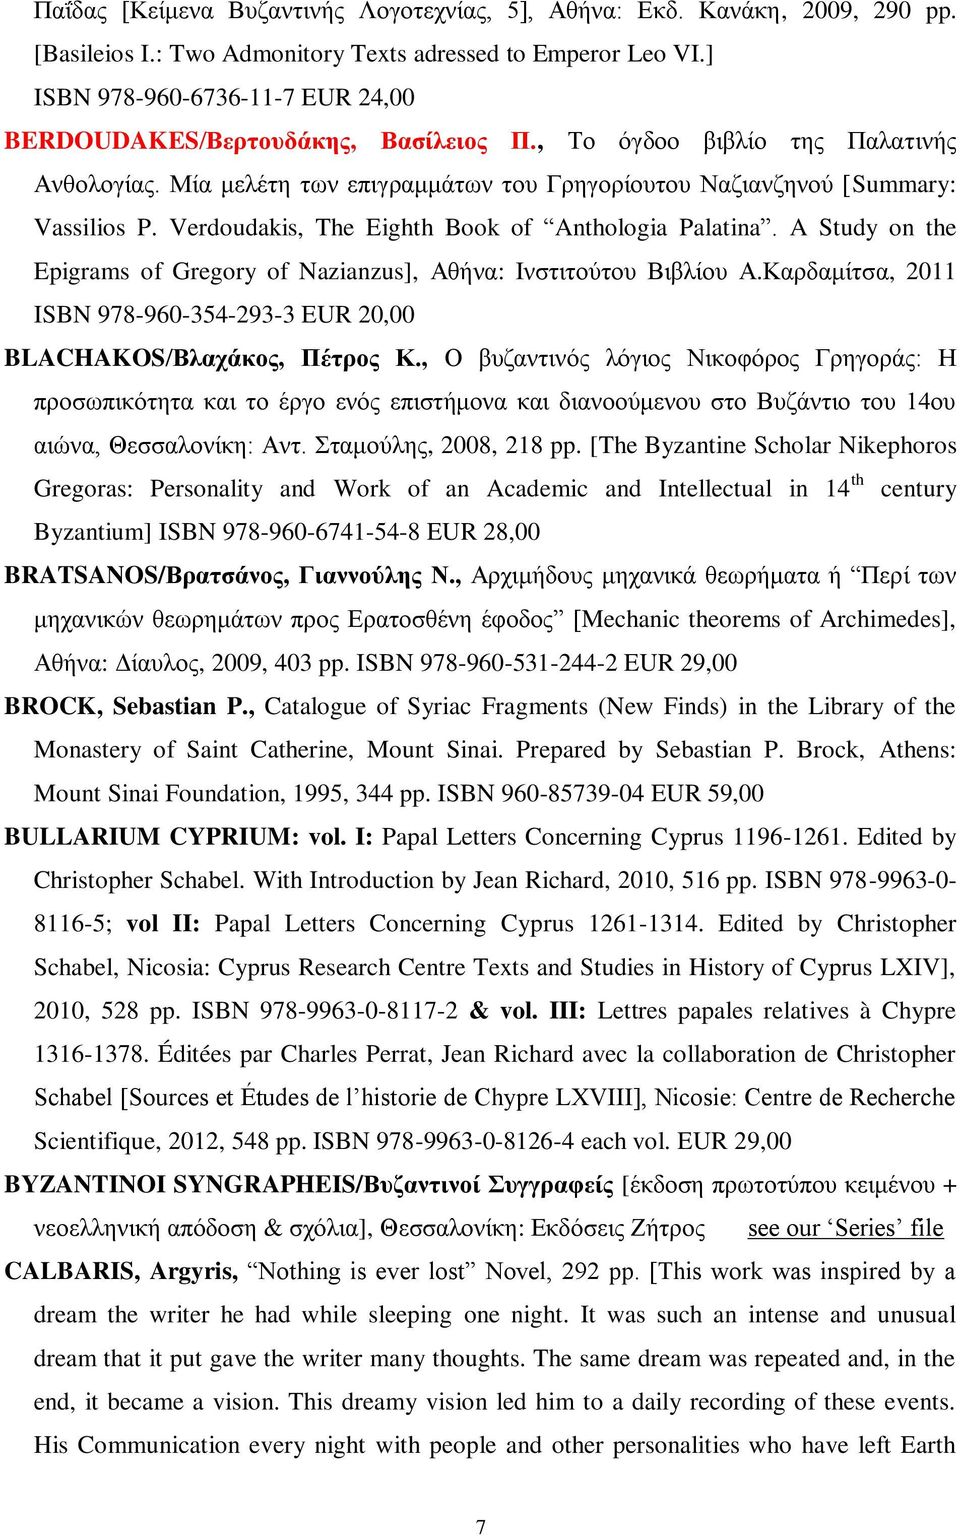 Verdoudakis, The Eighth Book of Anthologia Palatina. A Study on the Epigrams of Gregory of Nazianzus], Αθήνα: Ινστιτούτου Βιβλίου Α.